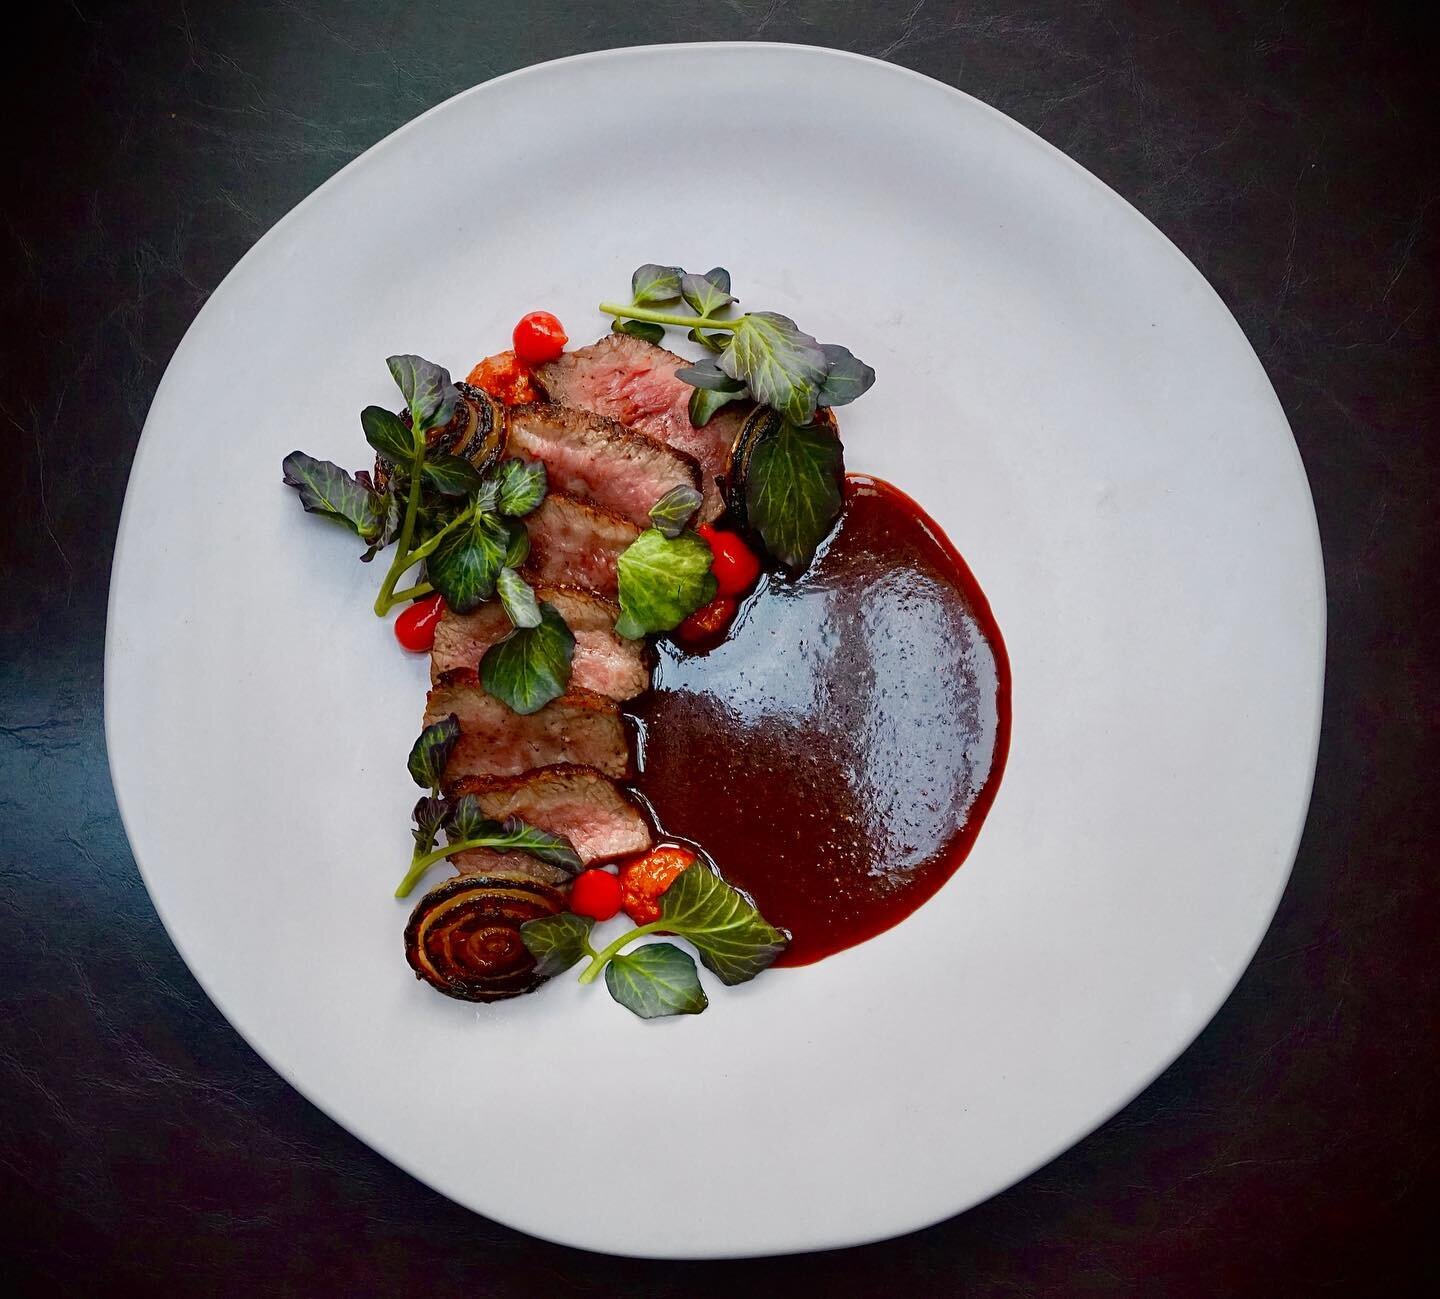 Chef Kevin Tien of @moonrabbitdc and Chef Bin Lu of @bluerockvirginia are cooking for a cause on Monday, May 8th at Moon Rabbit! 

The collaborative five-course tasting menu is a refined interpretation of the Classic American Steakhouse showcasing th